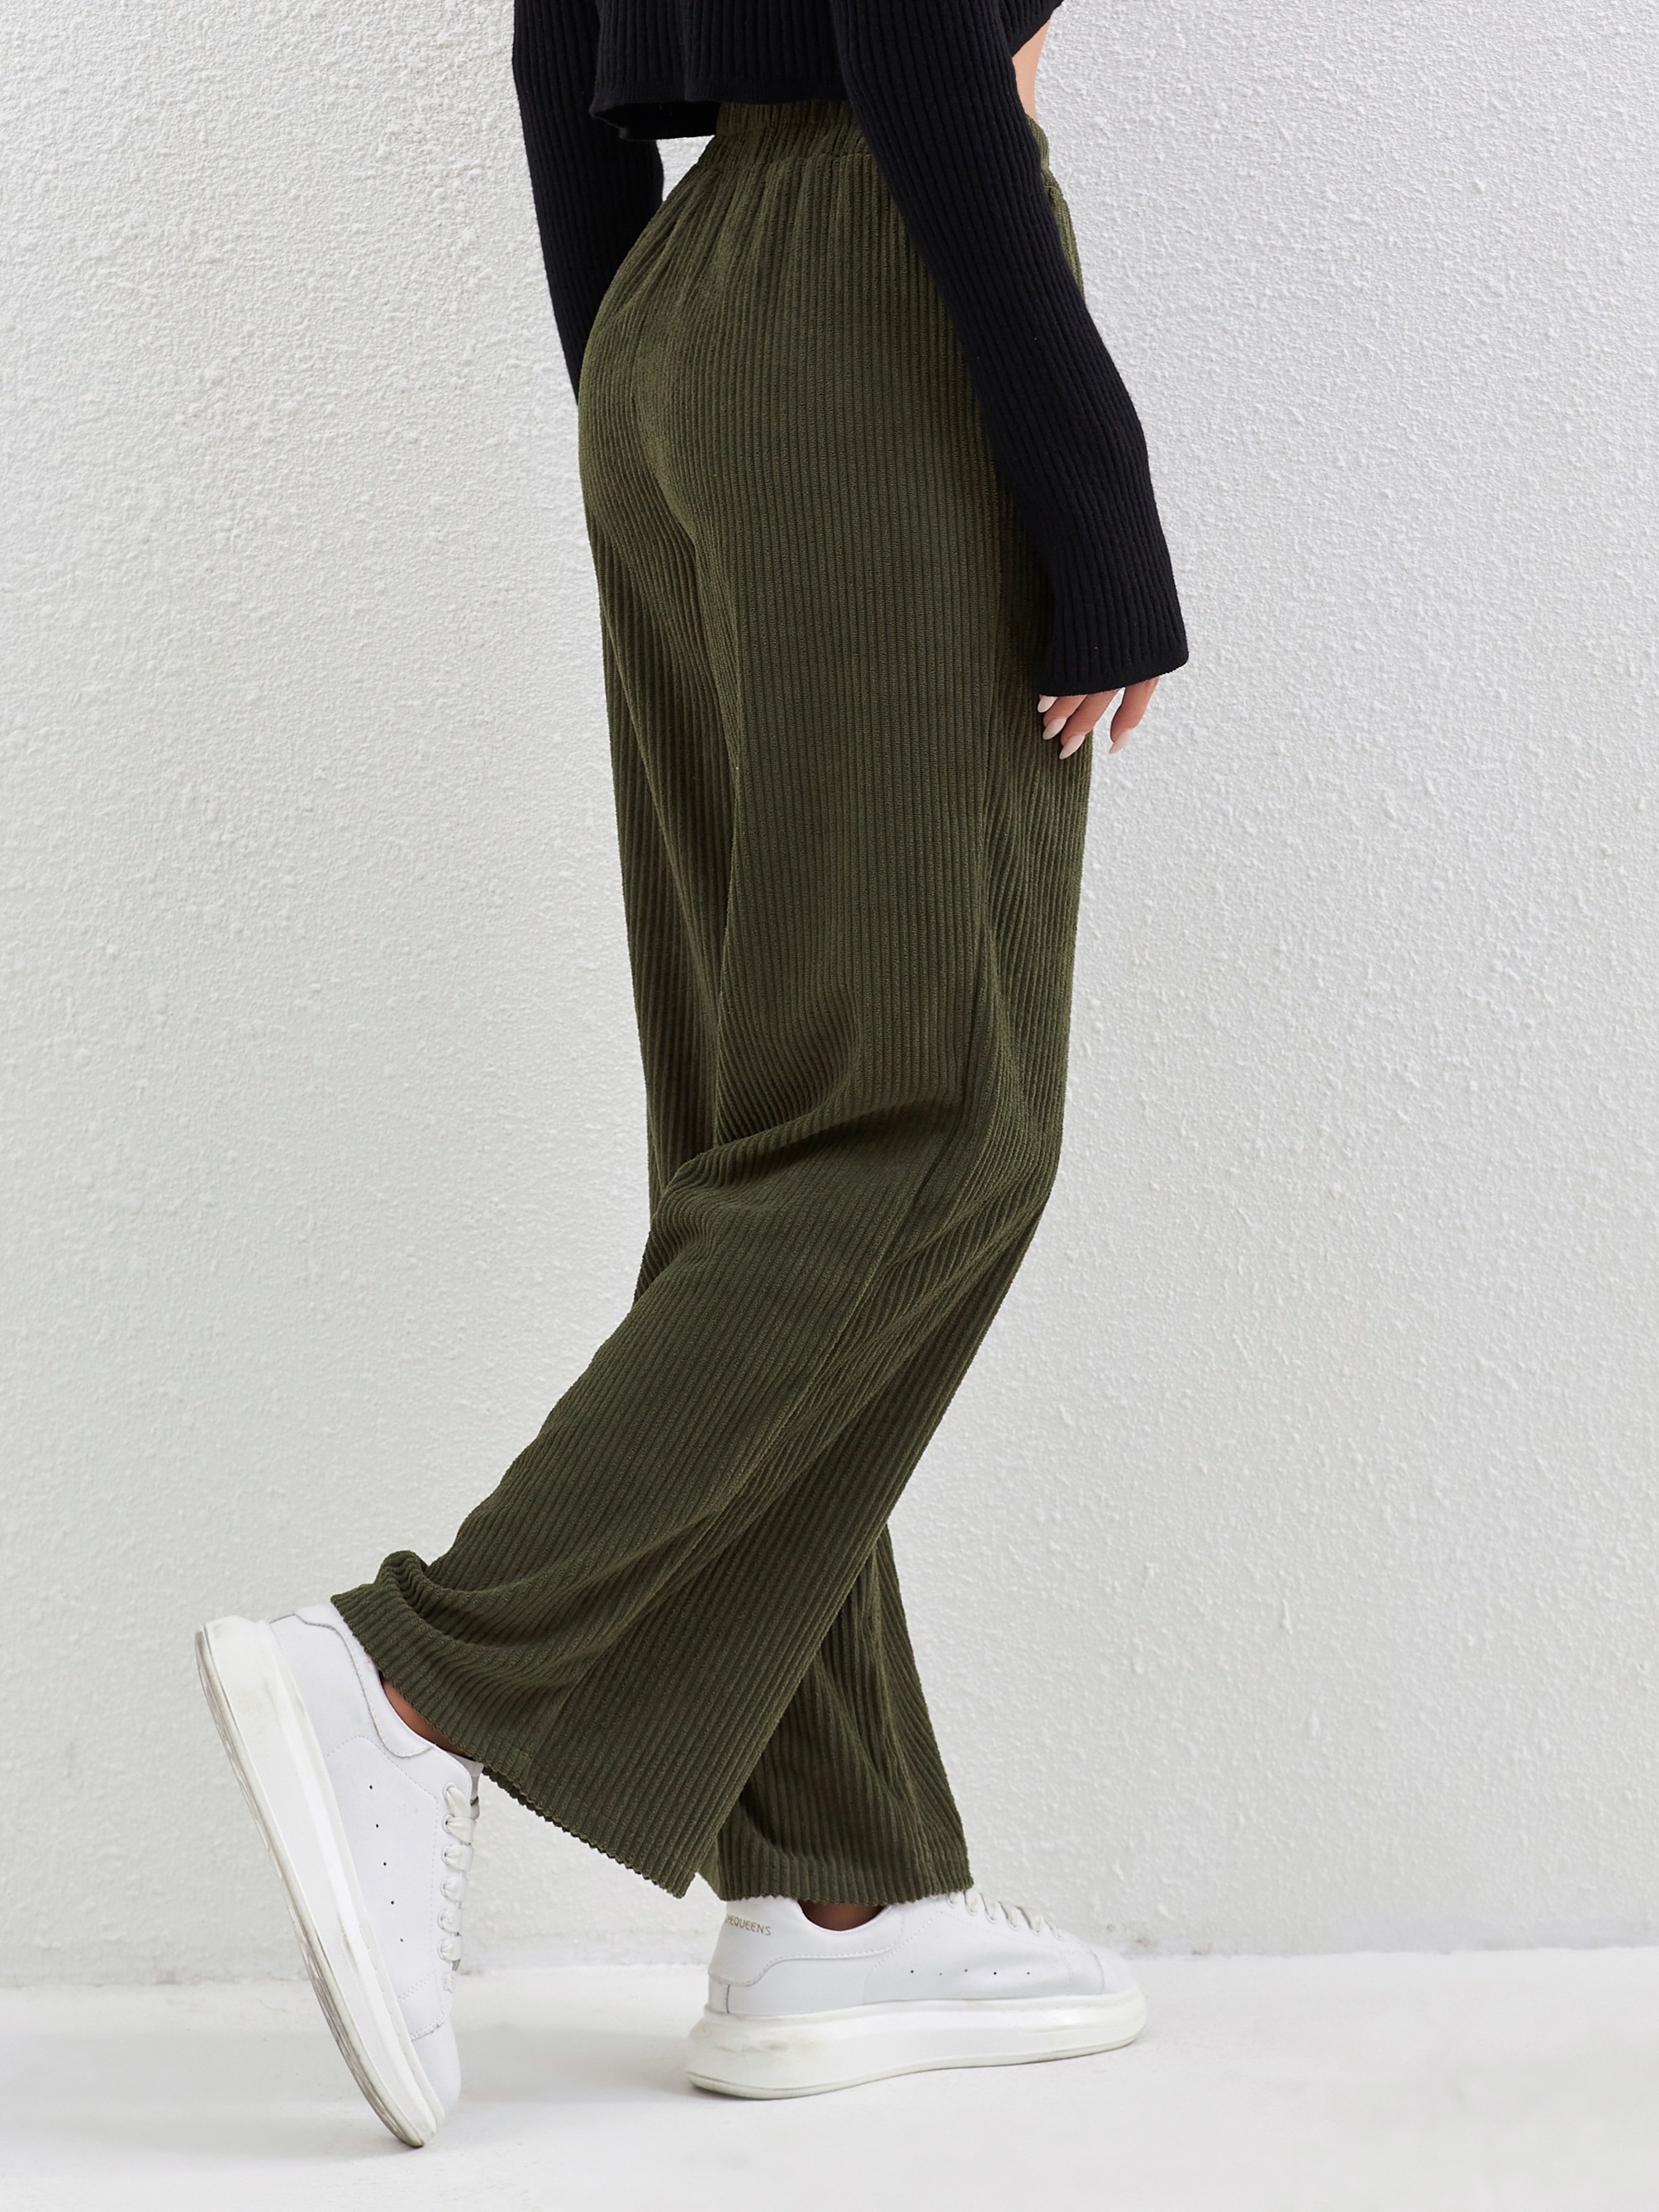 solid corduroy straight leg pants casual high waist loose pants with pocket womens clothing details 7